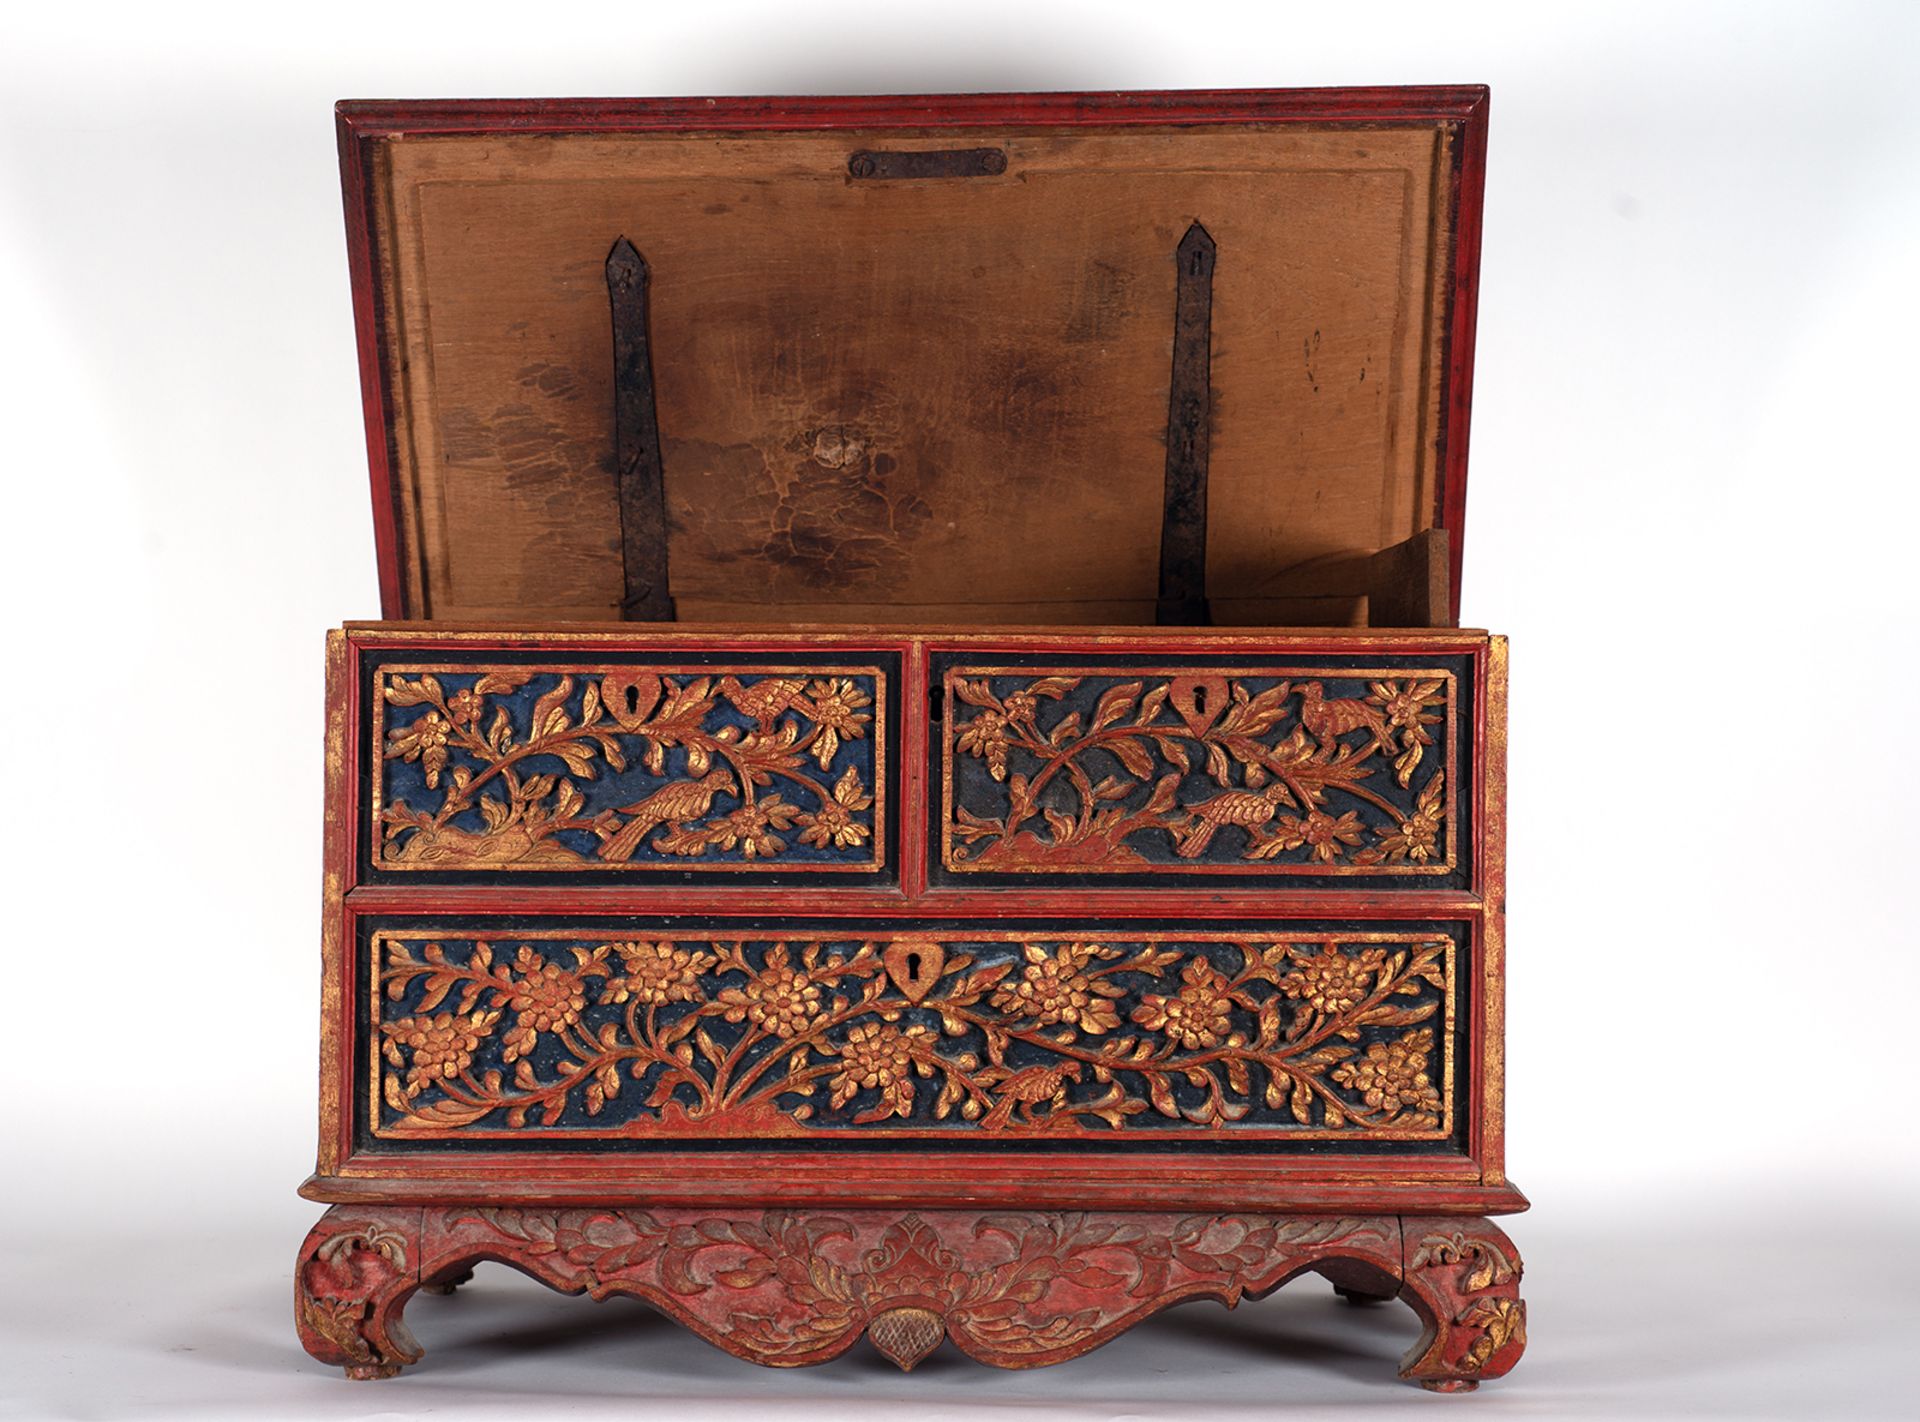 Important Mexican coffer, Viceroyalty of New Spain, 18th century - Image 2 of 4